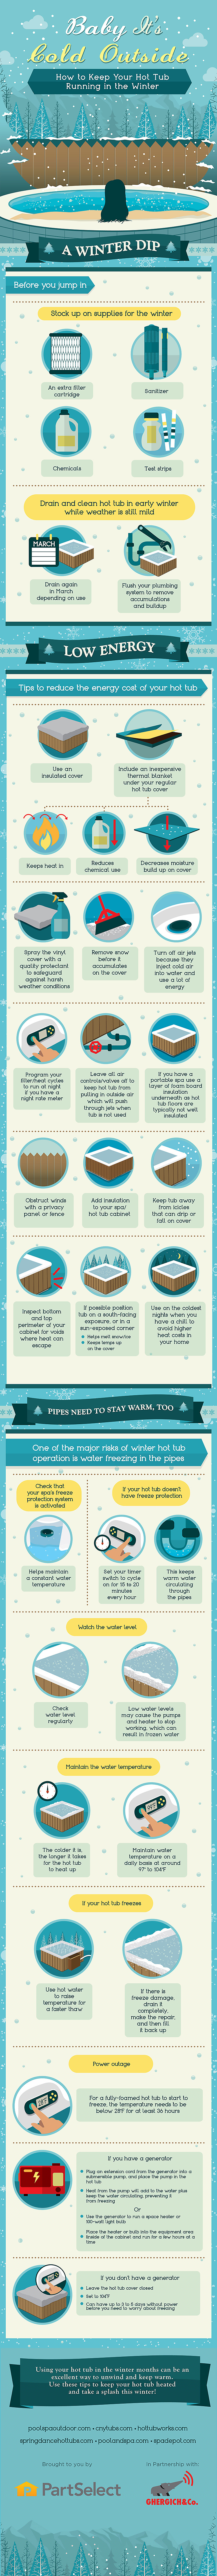 Baby It's Cold Outside: How to Keep Your Hot Tub Running in the Winter